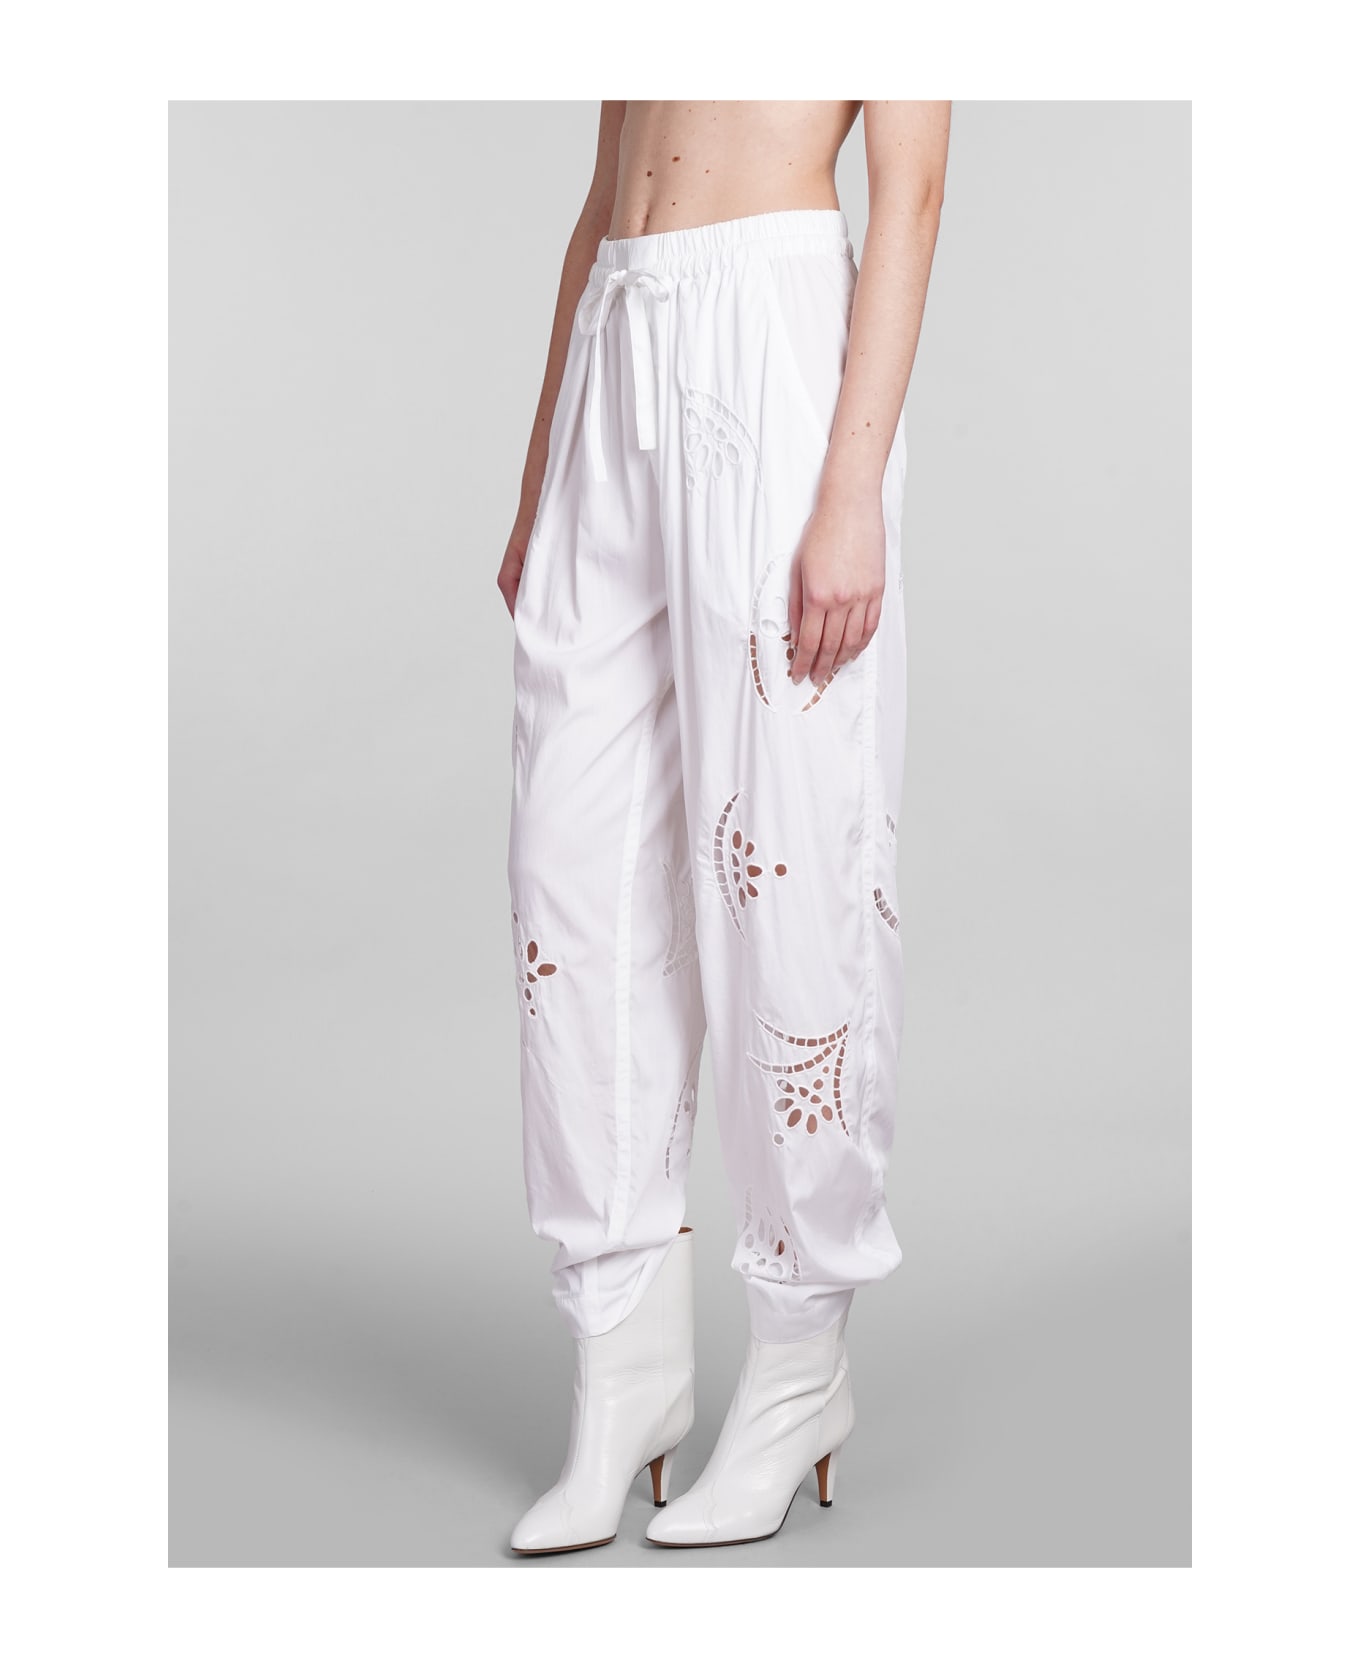 Isabel Marant Hectorina Pants In White Modal - white ボトムス